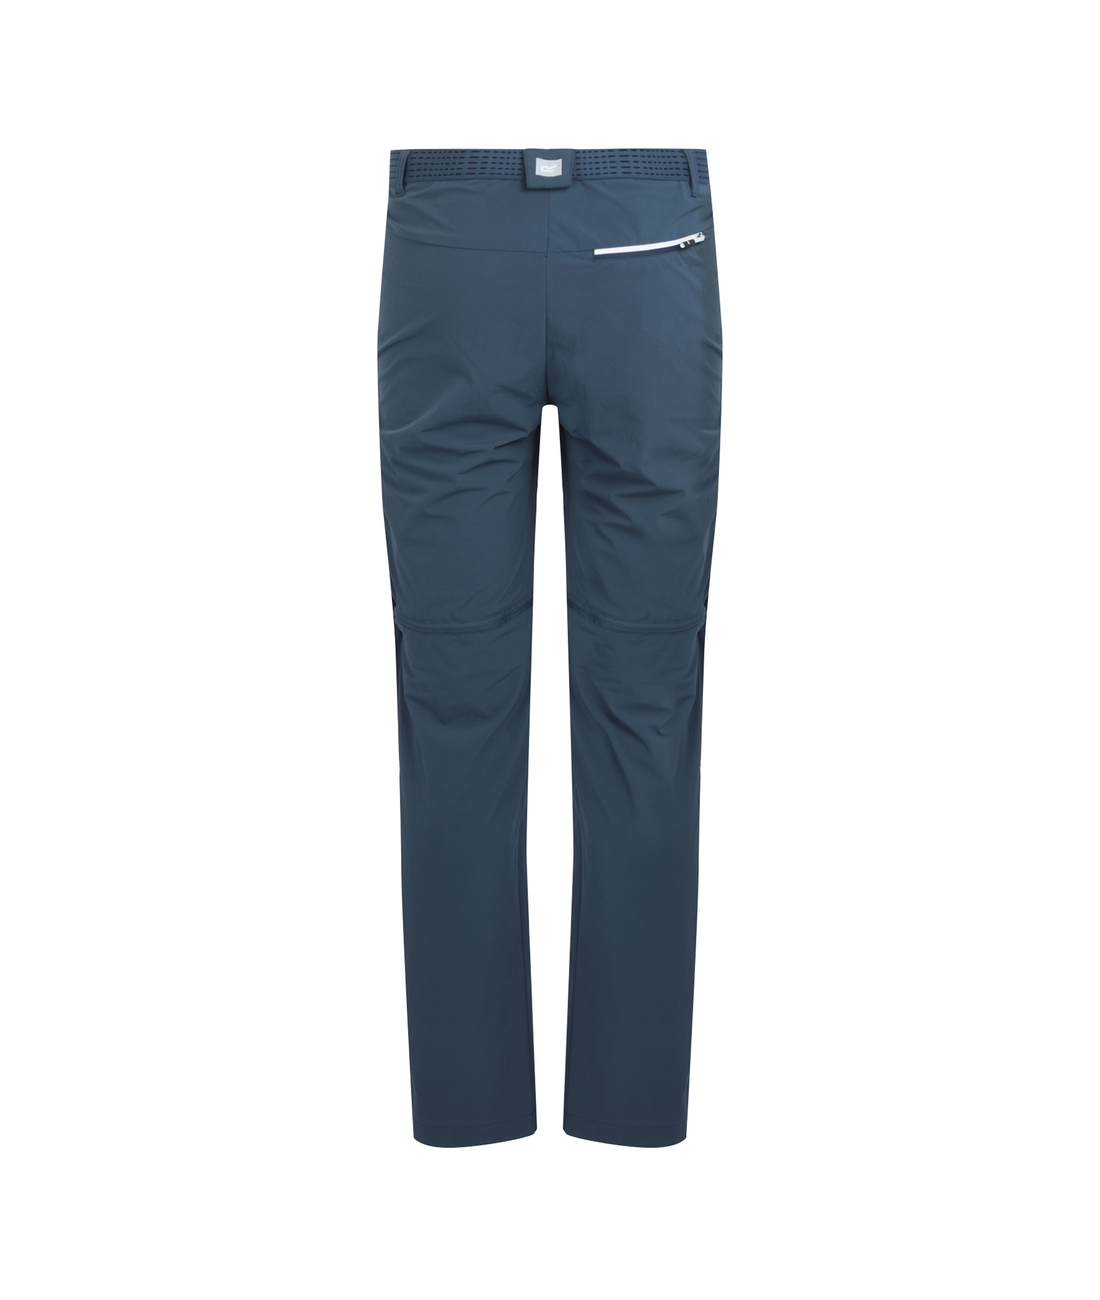 Mountain Zip-Off-Trousers - Herrenmodell, regulre Beinlnge